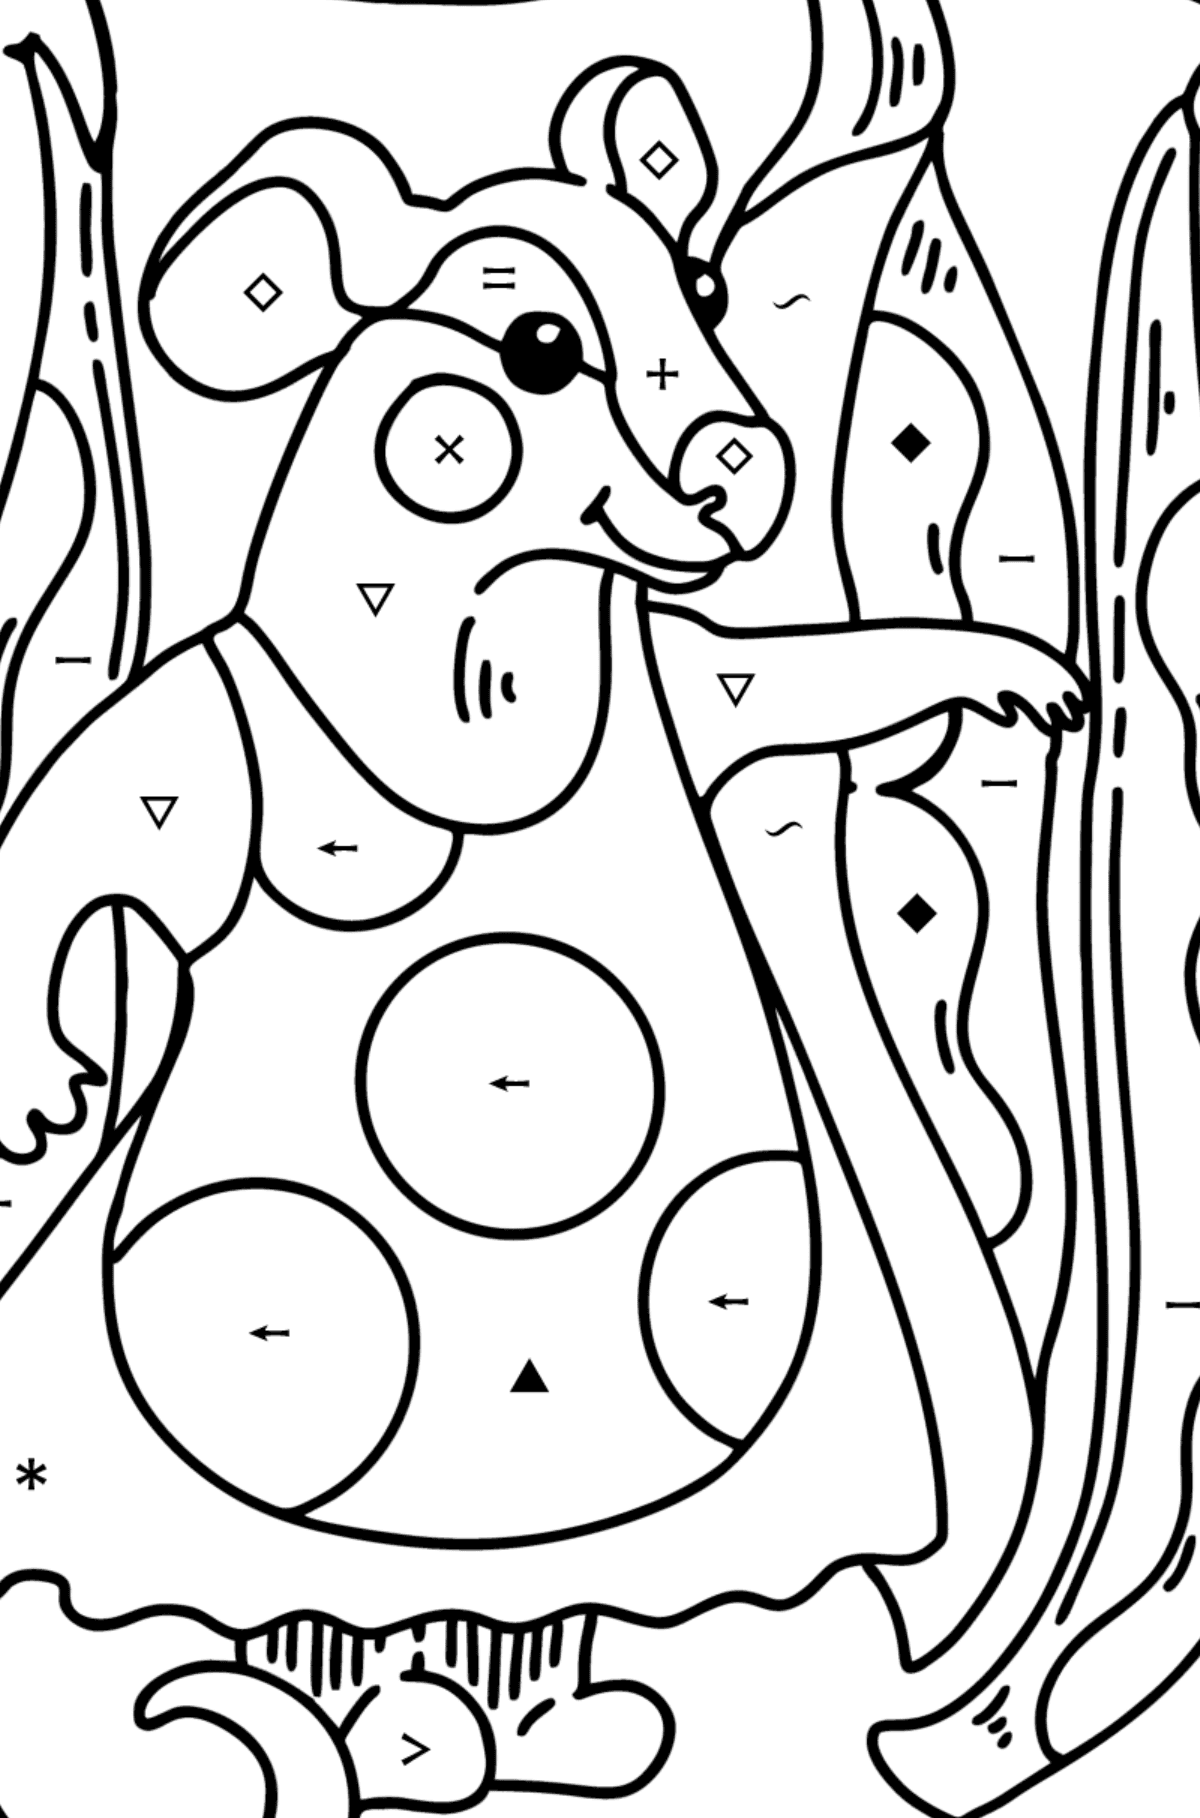 Coloring page - Cute Mouse - Coloring by Symbols for Kids